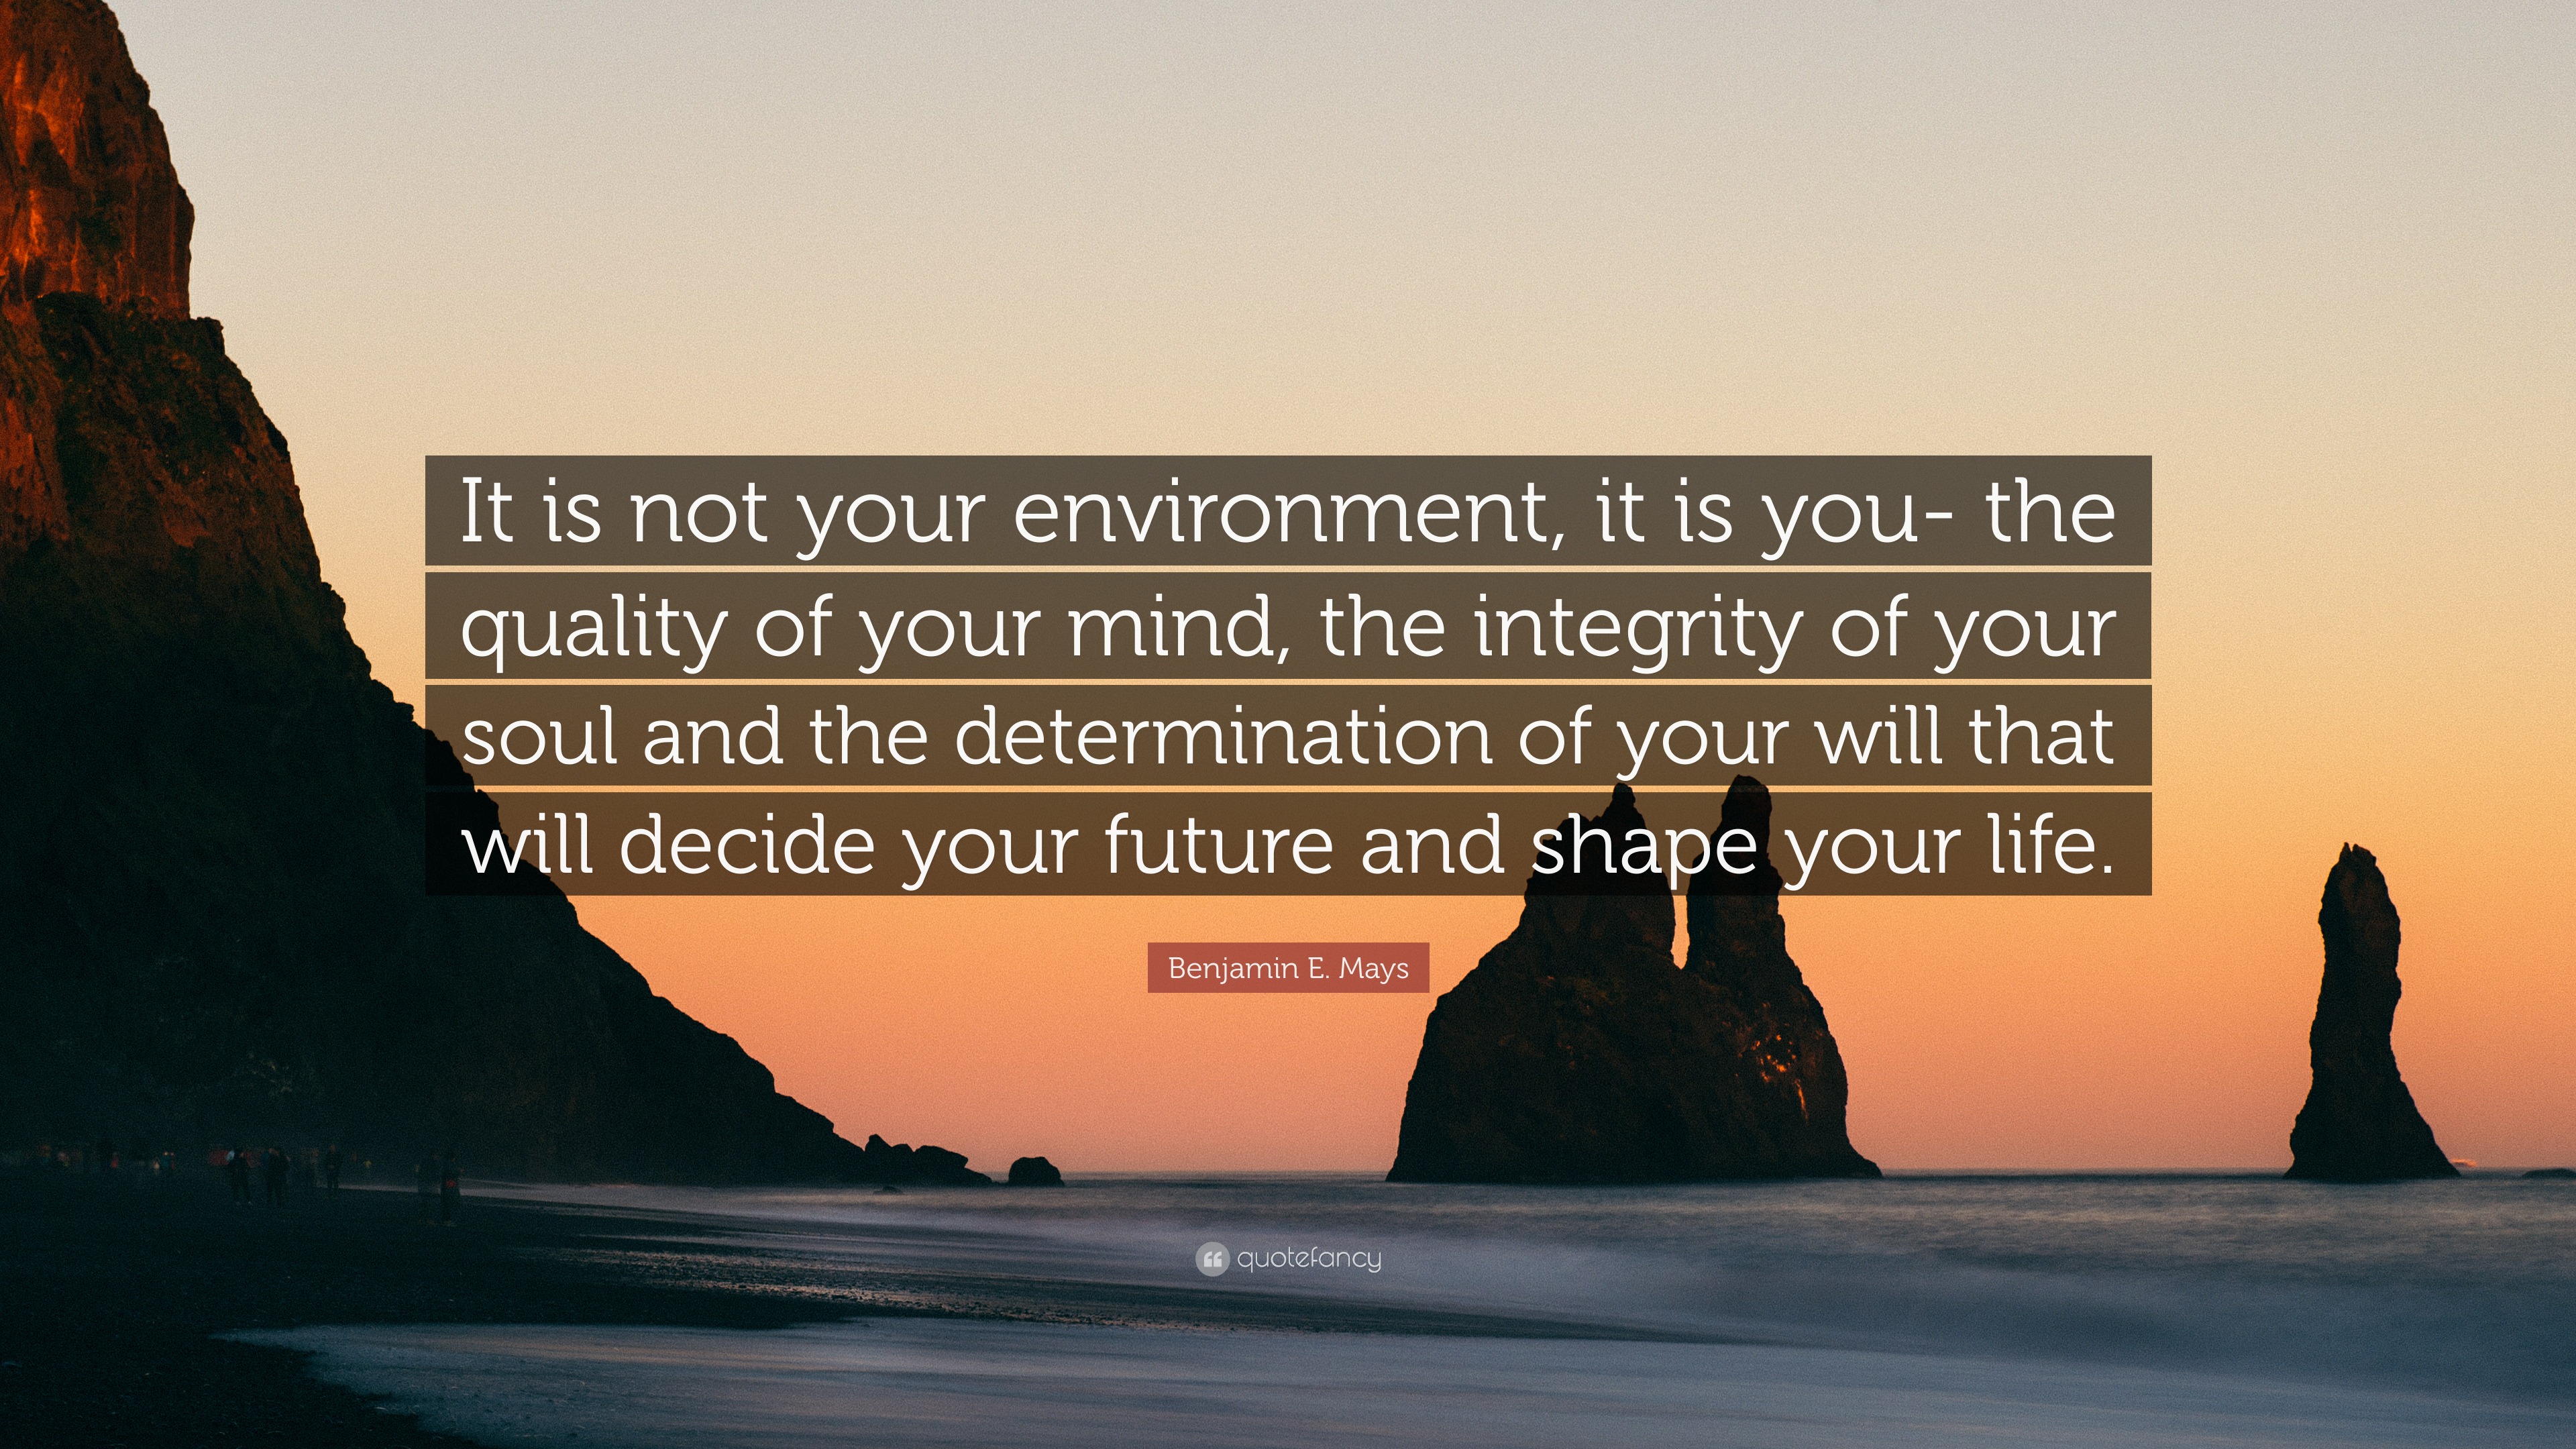 Benjamin E. Mays Quote: “It is not your environment, it is you- the